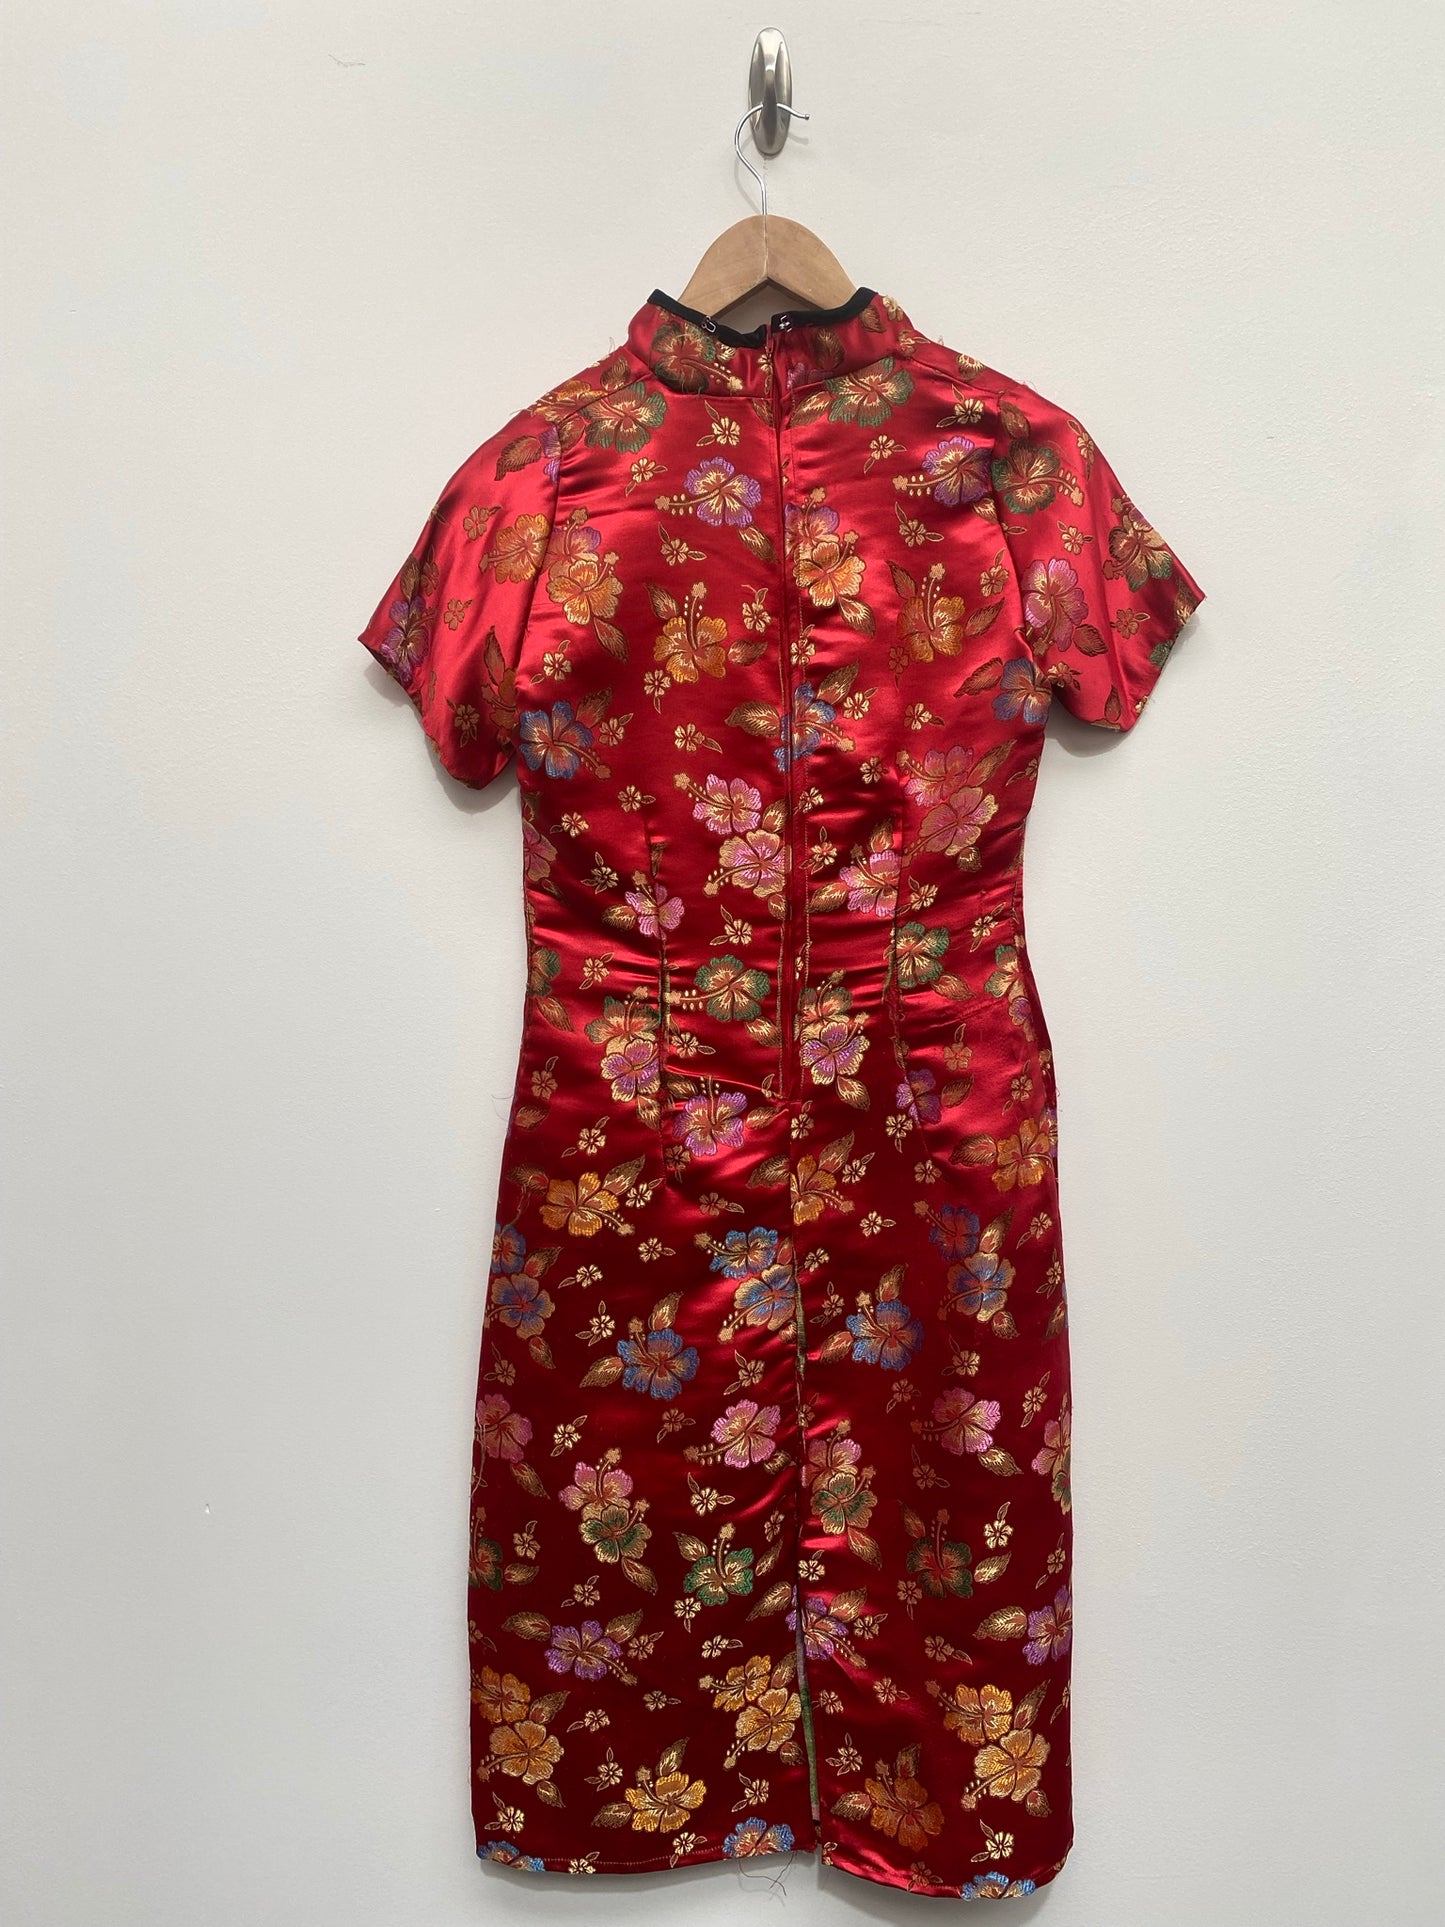 Ladies Vintage Chinese Cheongsam style Red Dress - Traditional Costumes & Clothing